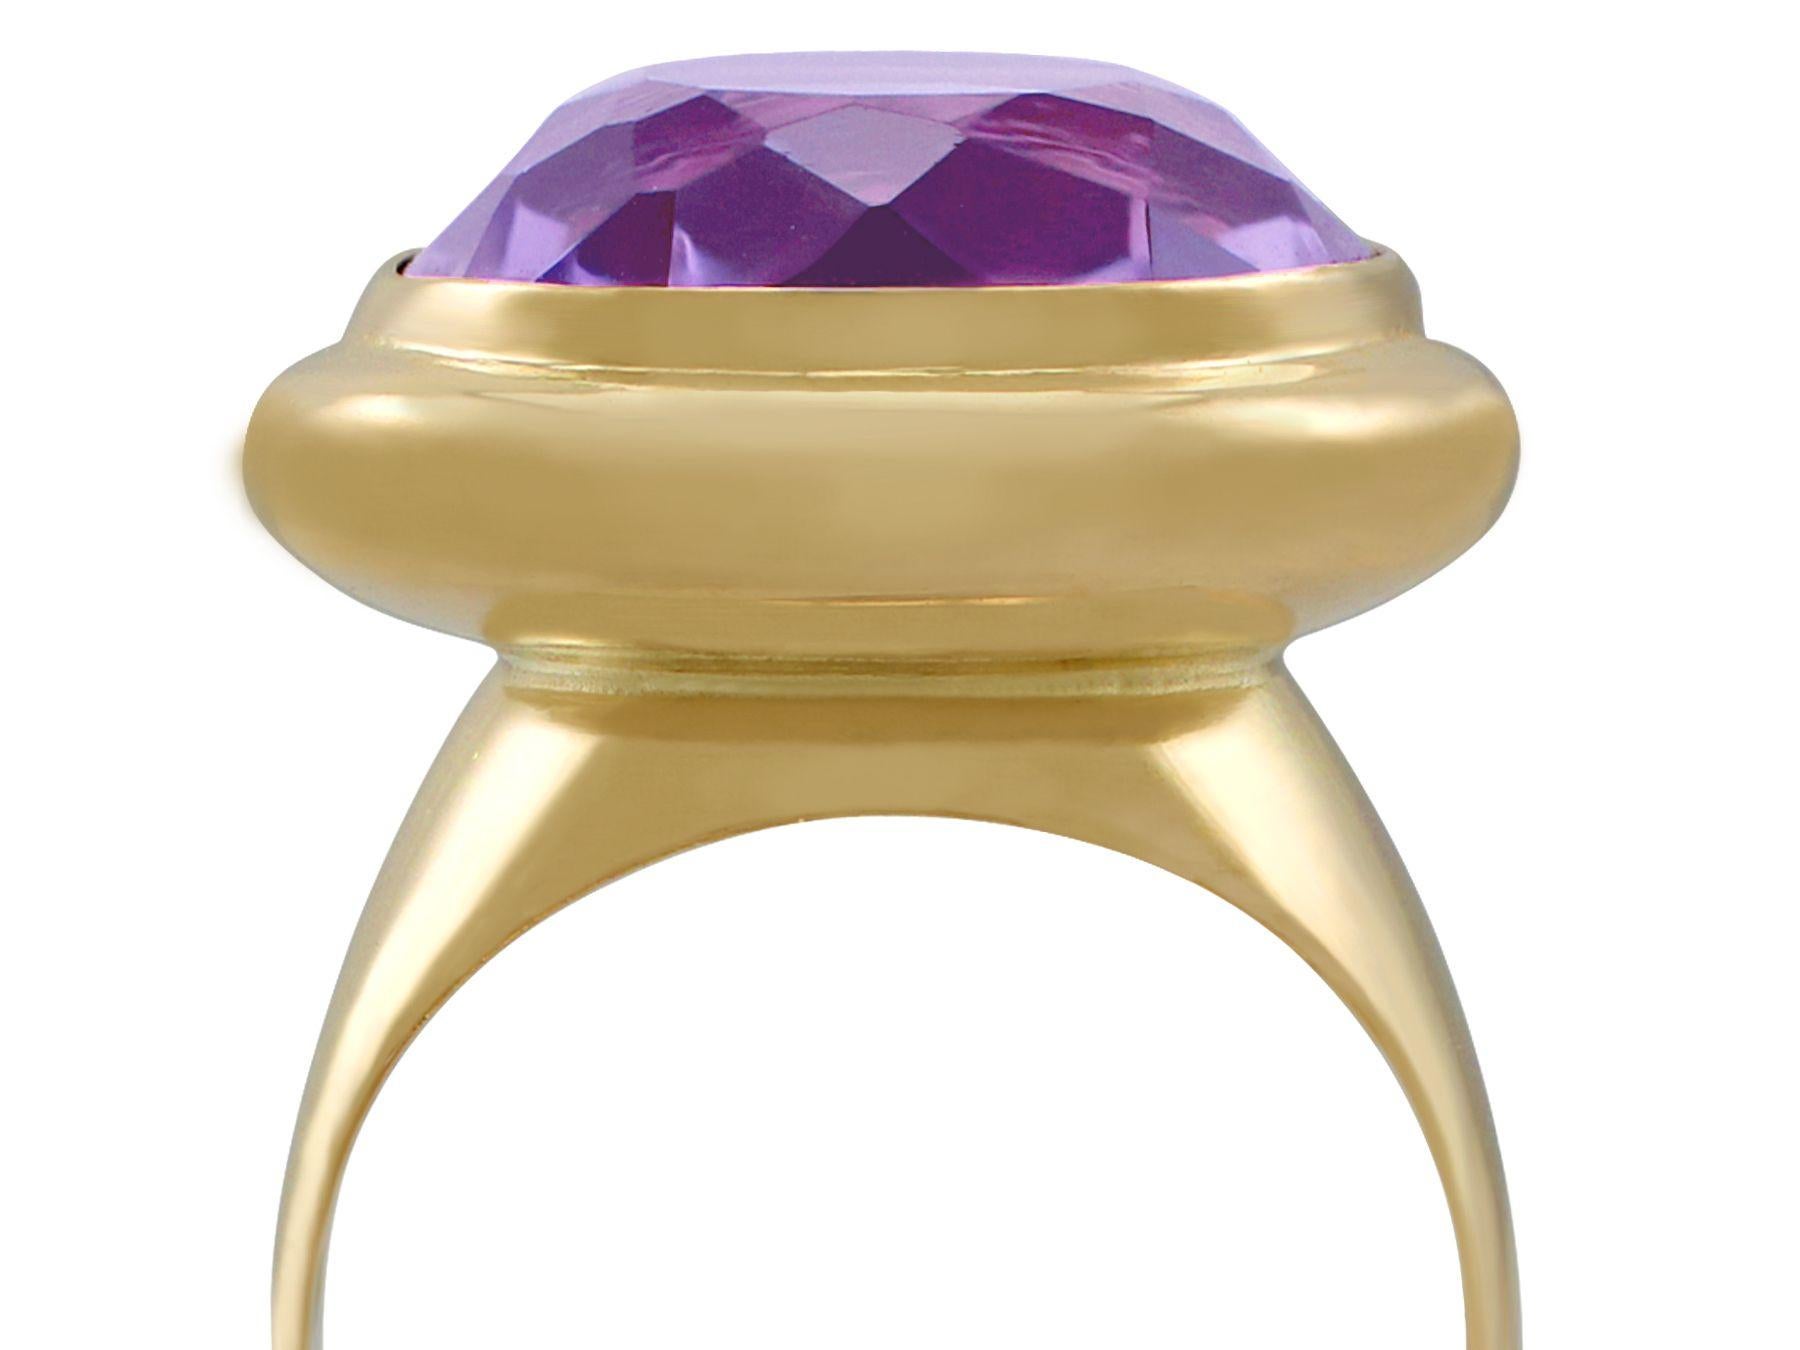 A fine and impressive vintage 13.53 carat amethyst and 18 karat yellow gold cocktail ring; part of our diverse gemstone jewelry and estate jewelry collections.

This fine and impressive amethyst and gold ring has been crafted in 18k yellow